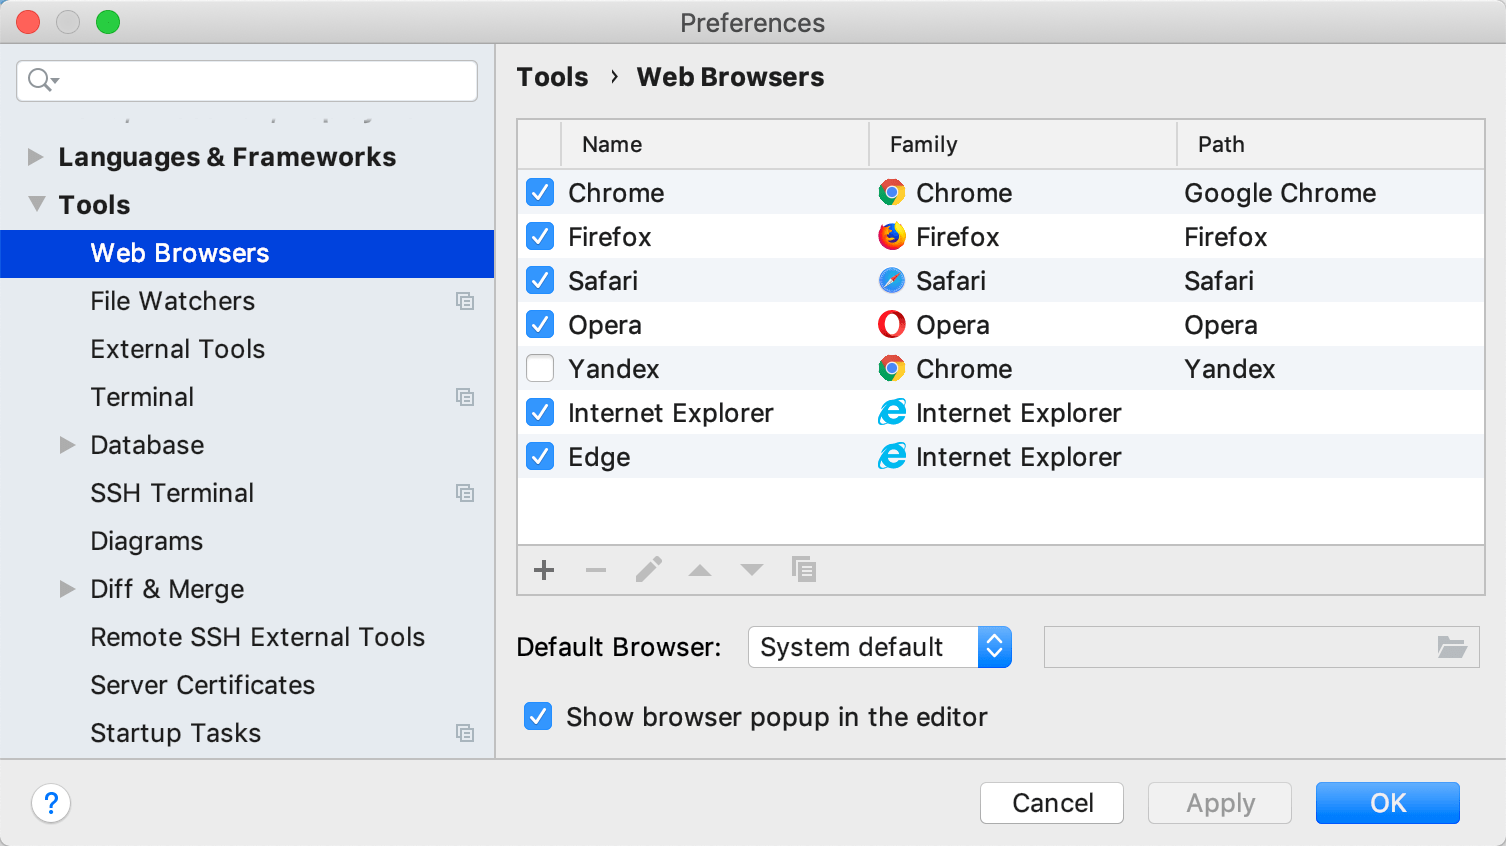 The Web Browsers page in Preferences